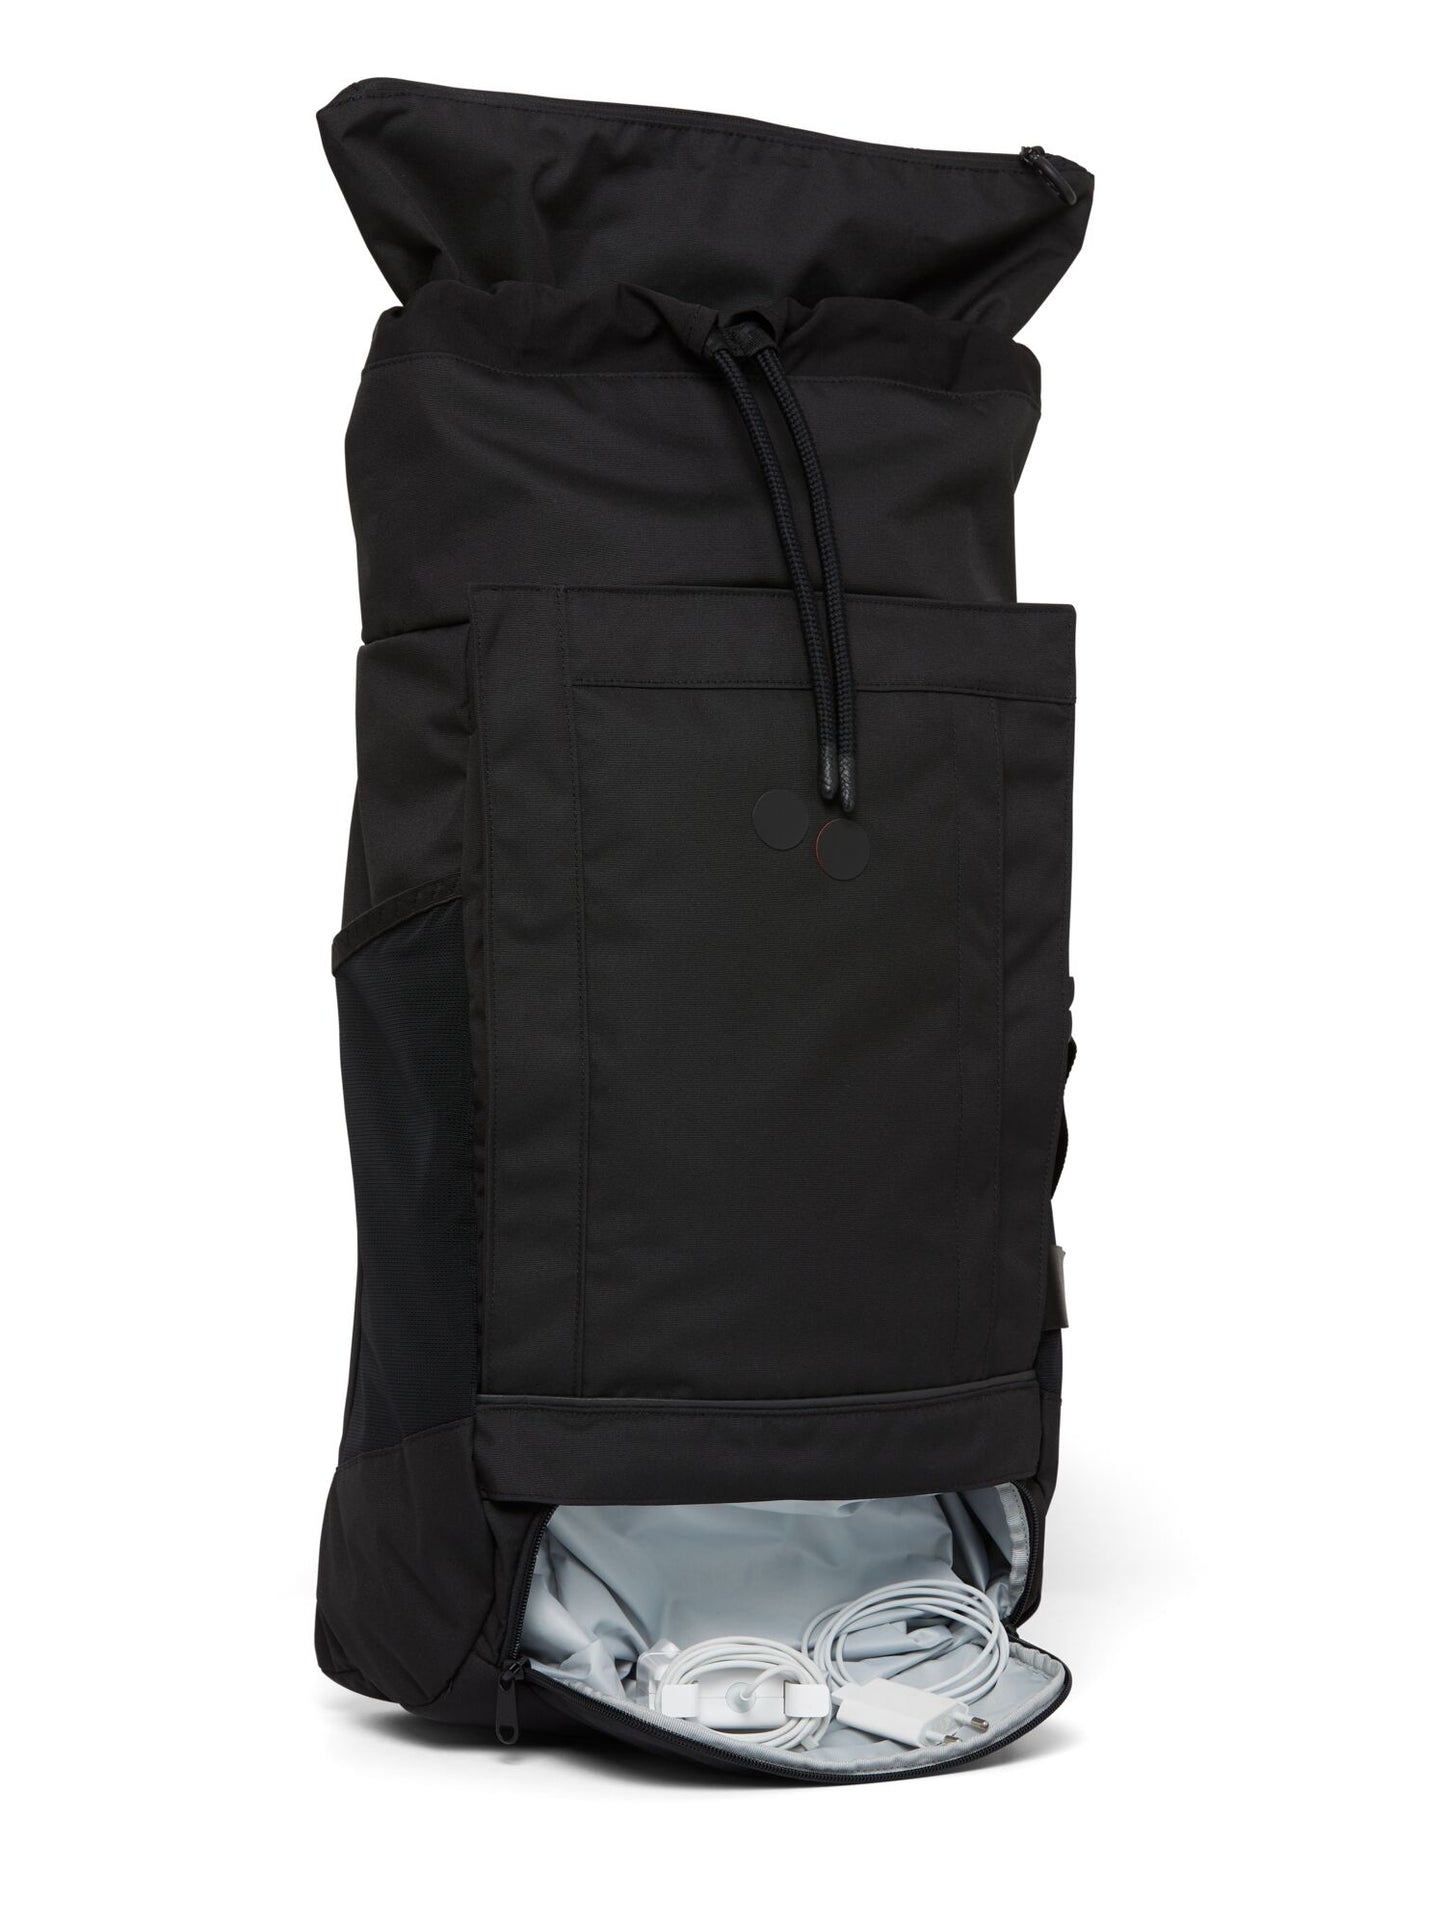 pinqponq-backpack-blok-large-rooted-black-detail